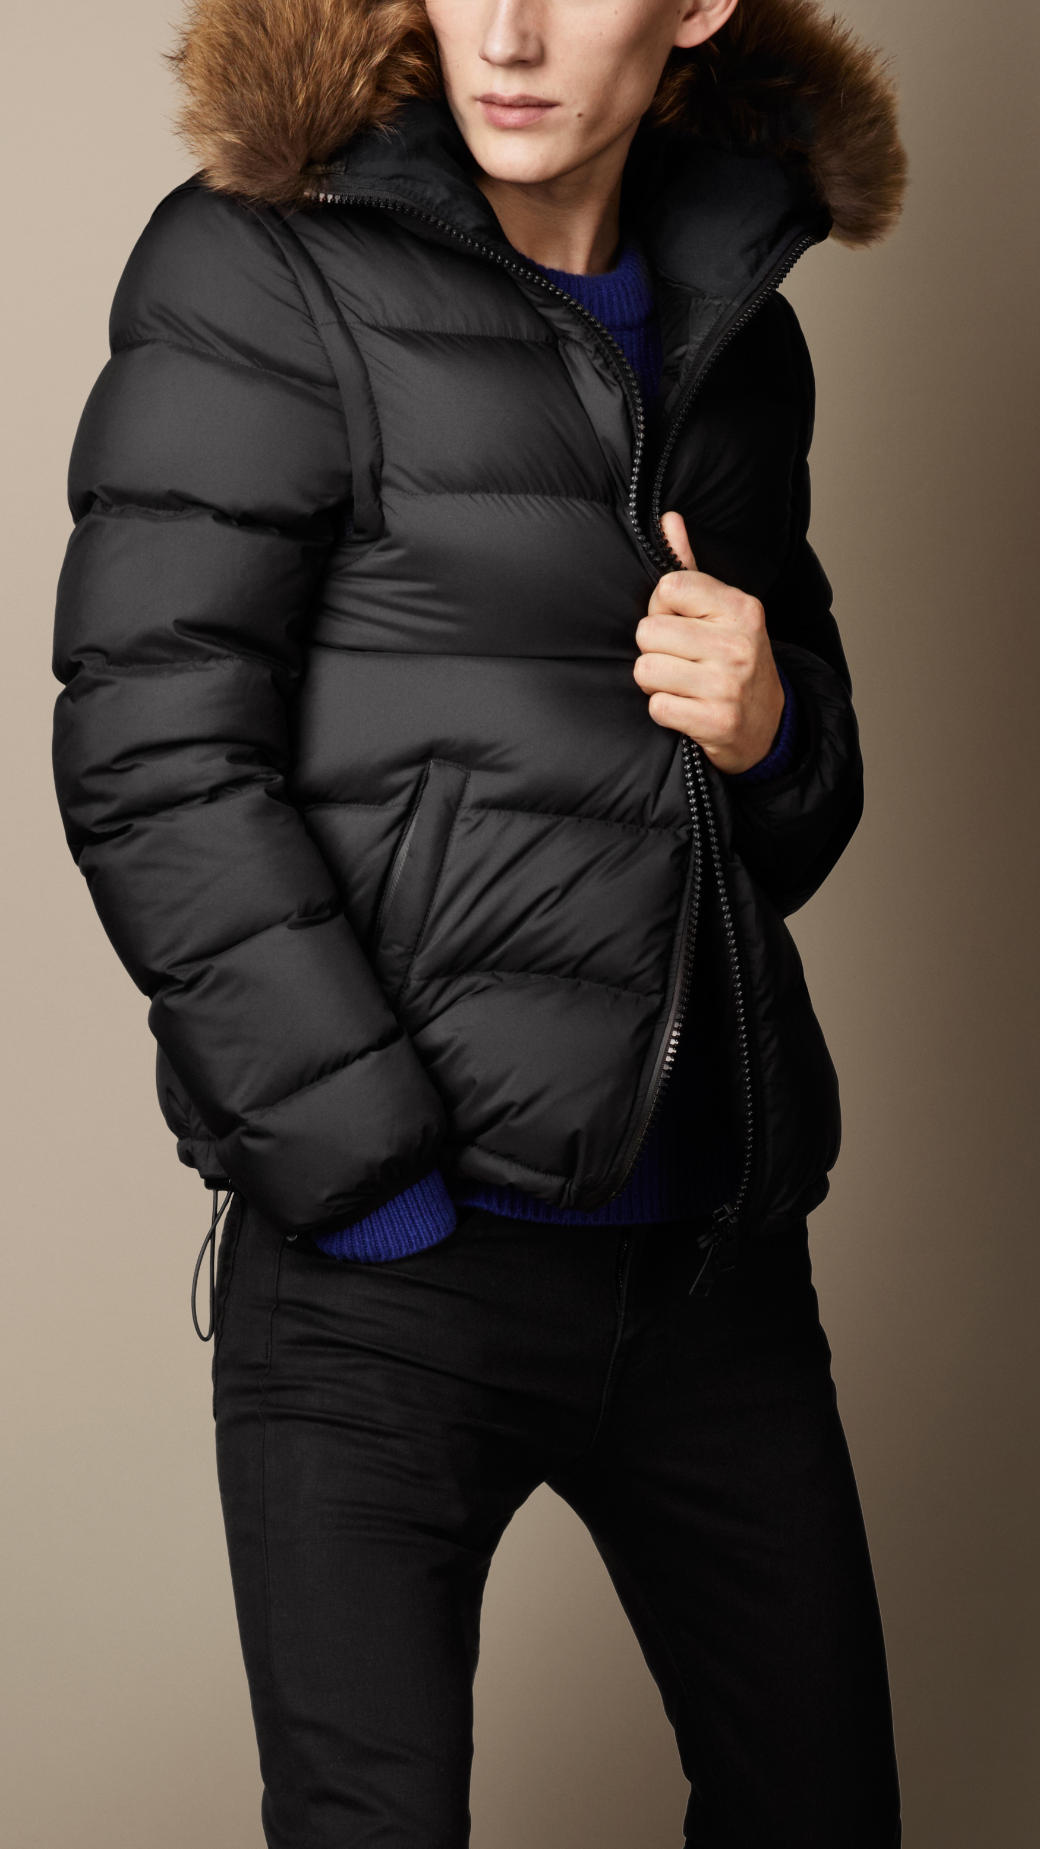 Burberry Fur Trim Downfilled Puffer Jacket in Black - Lyst